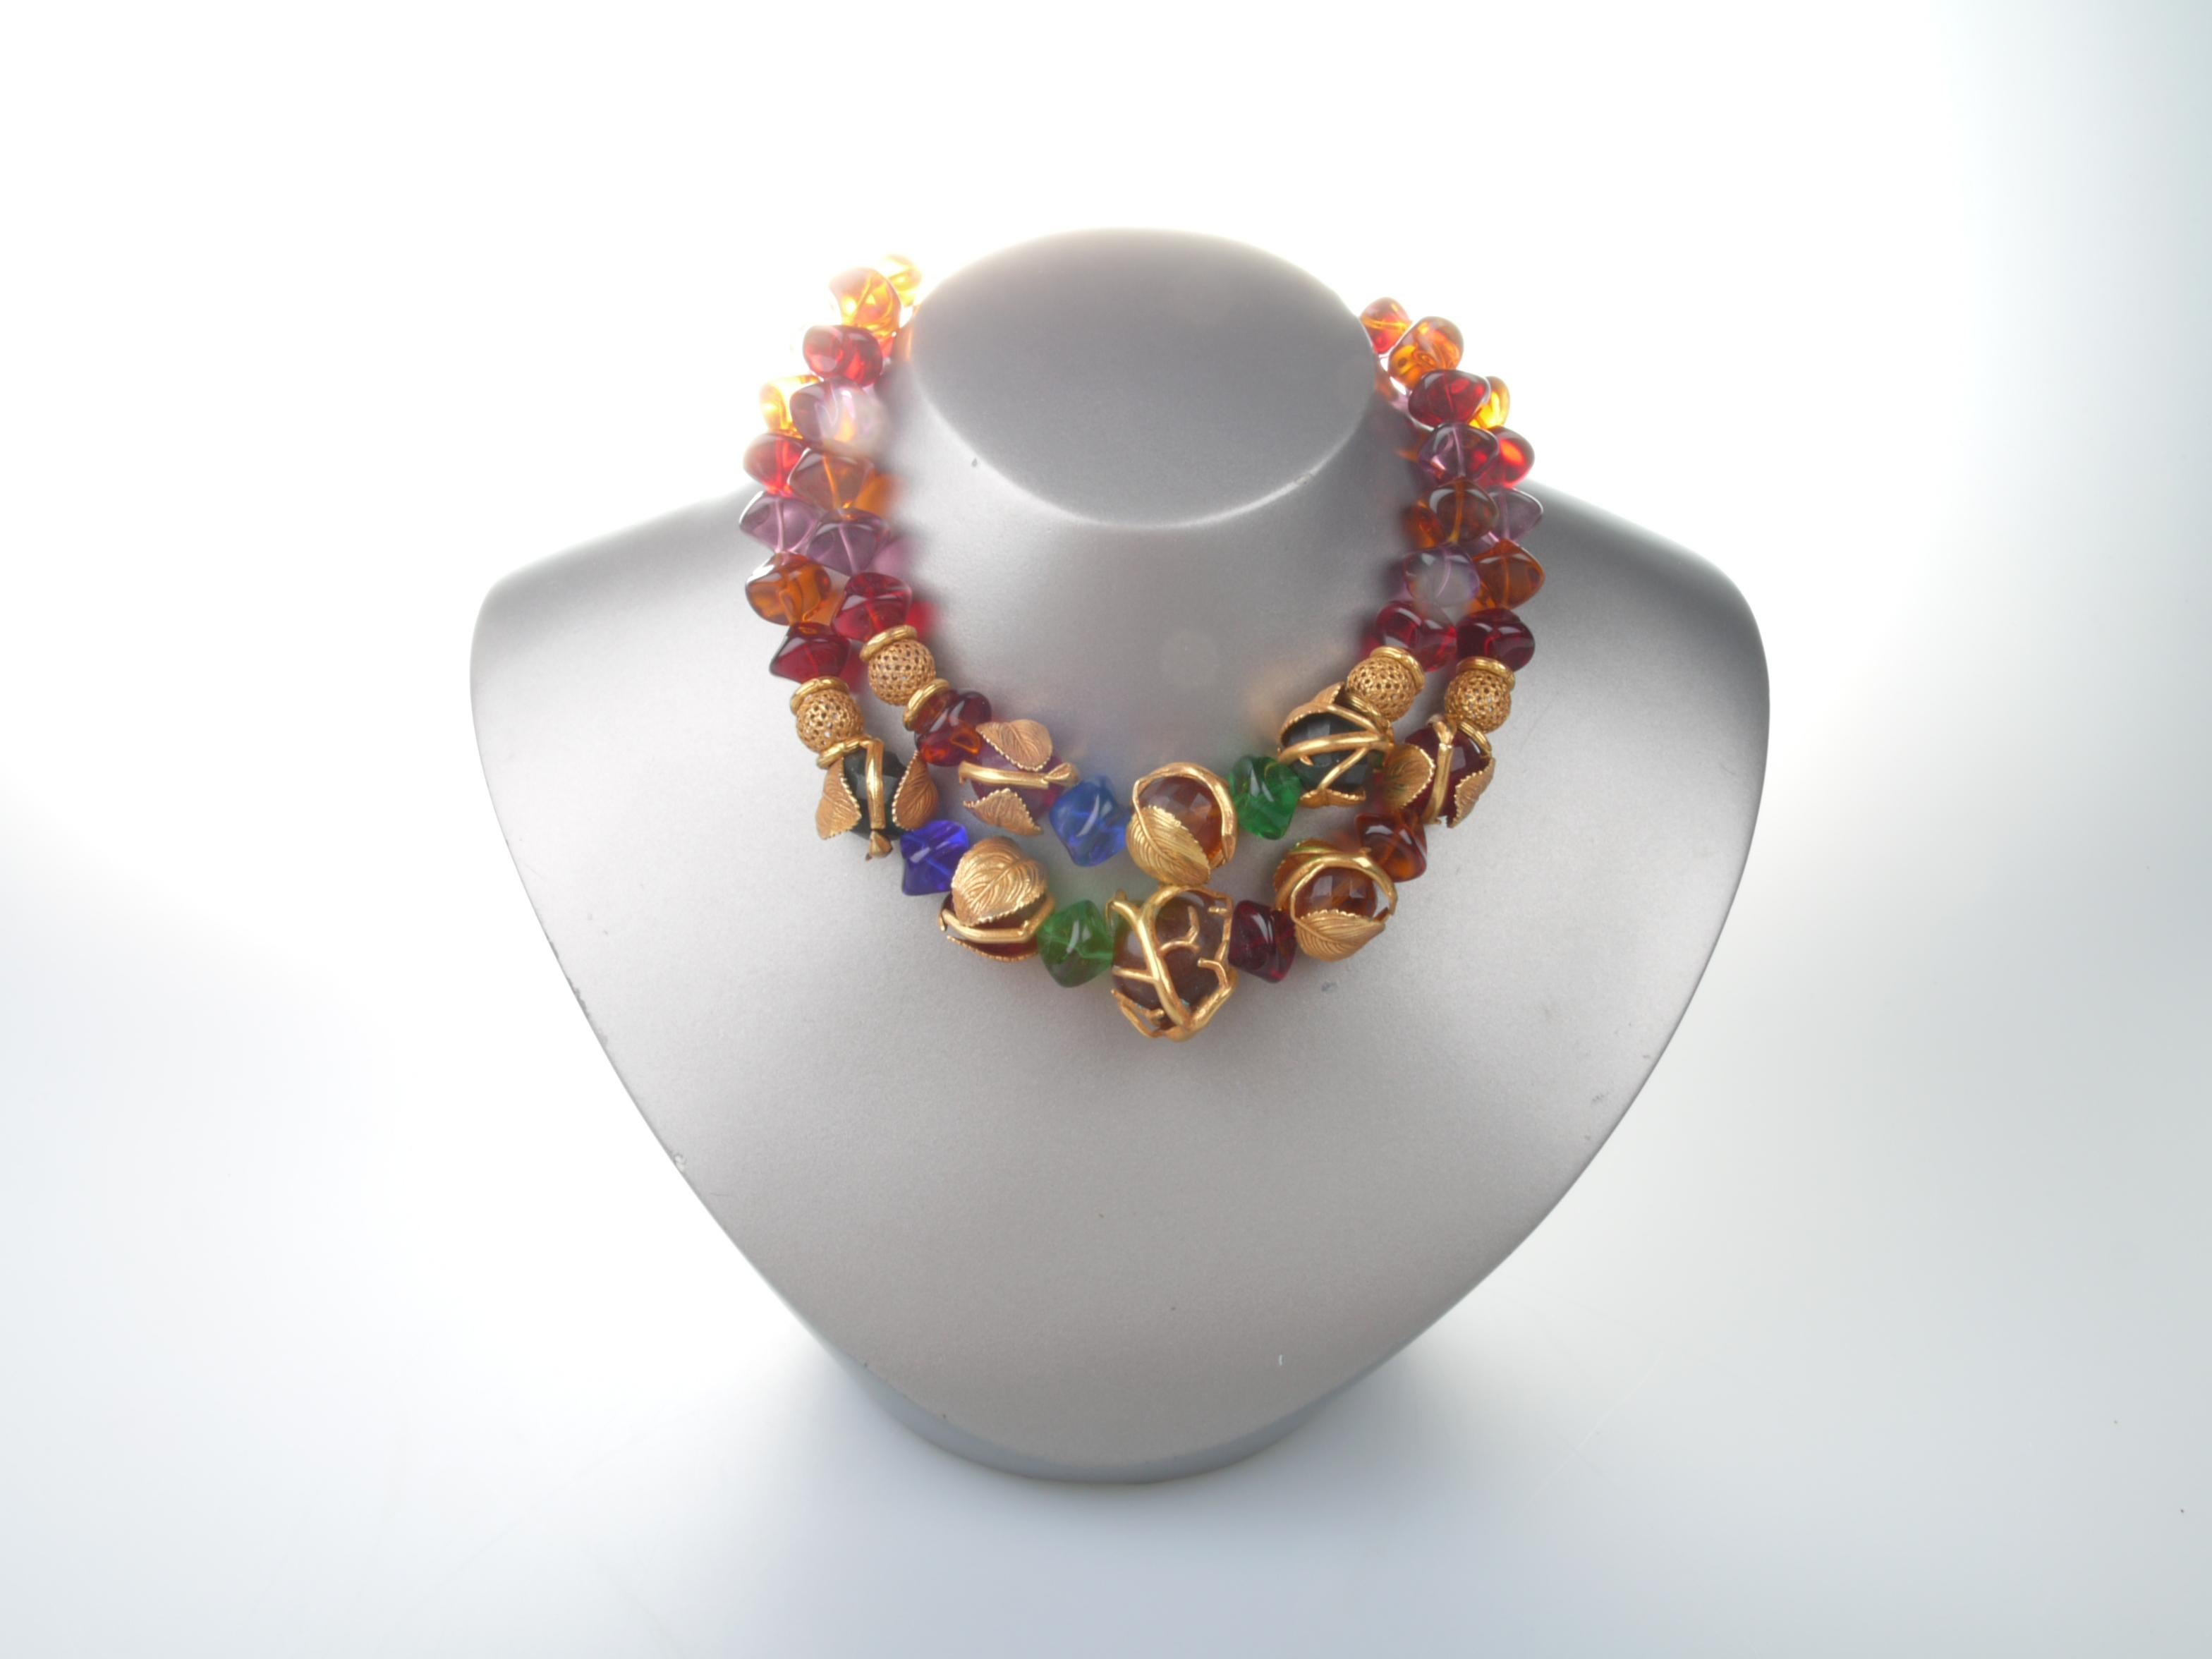 French Philippe Ferrandis multicolored glass bead necklace with various gold dipped metal spacers and beads encapsulated with whimsical gold dipped coverings.
Makers mark attached to the opening.